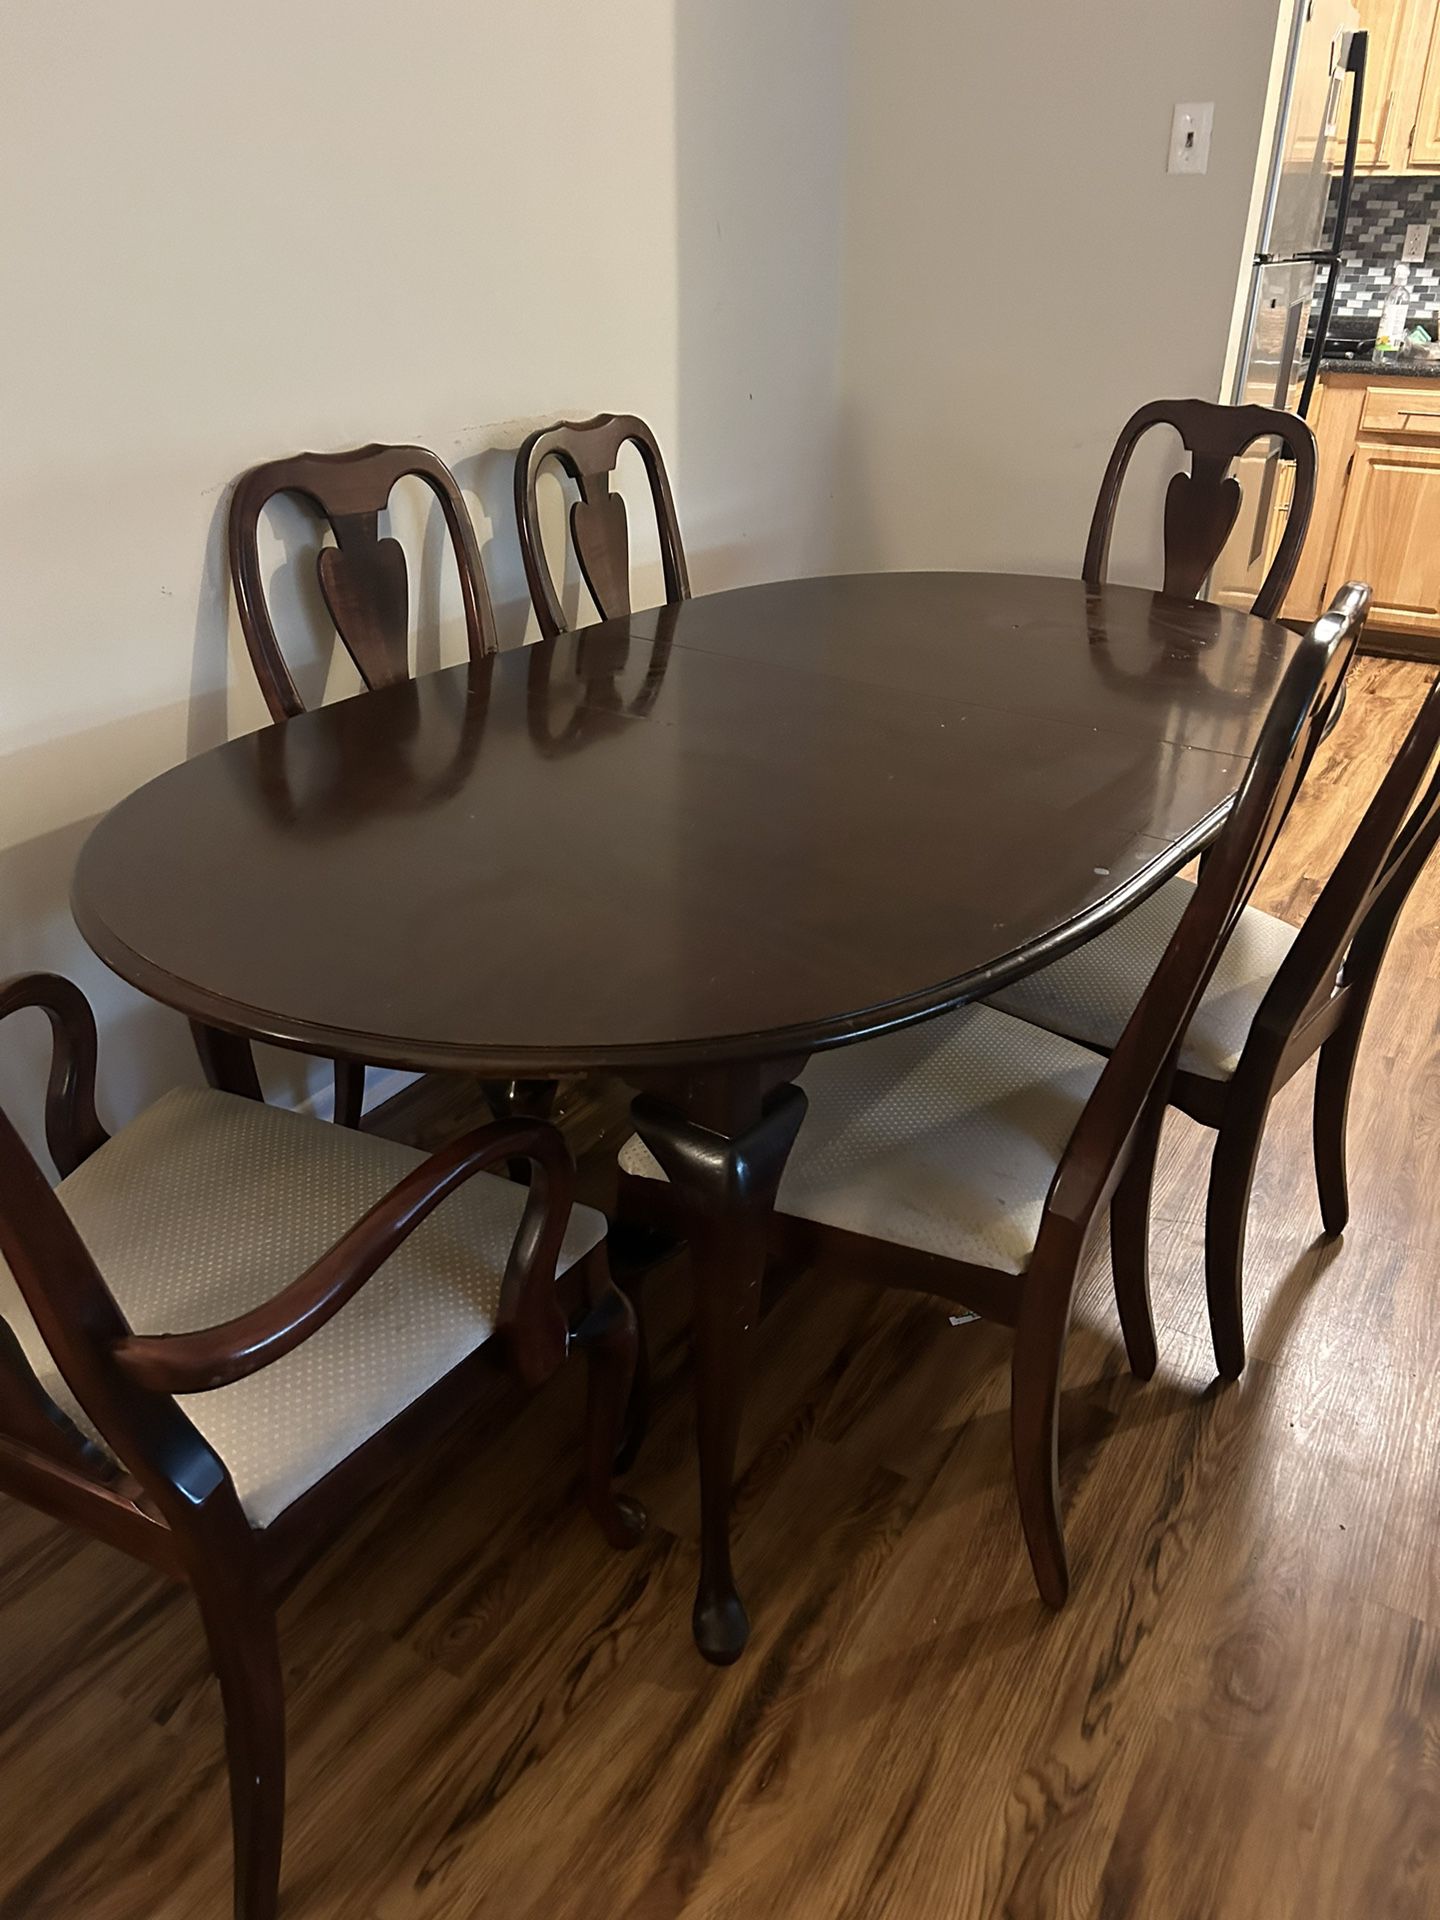 Dining Room table &6 Chairs 